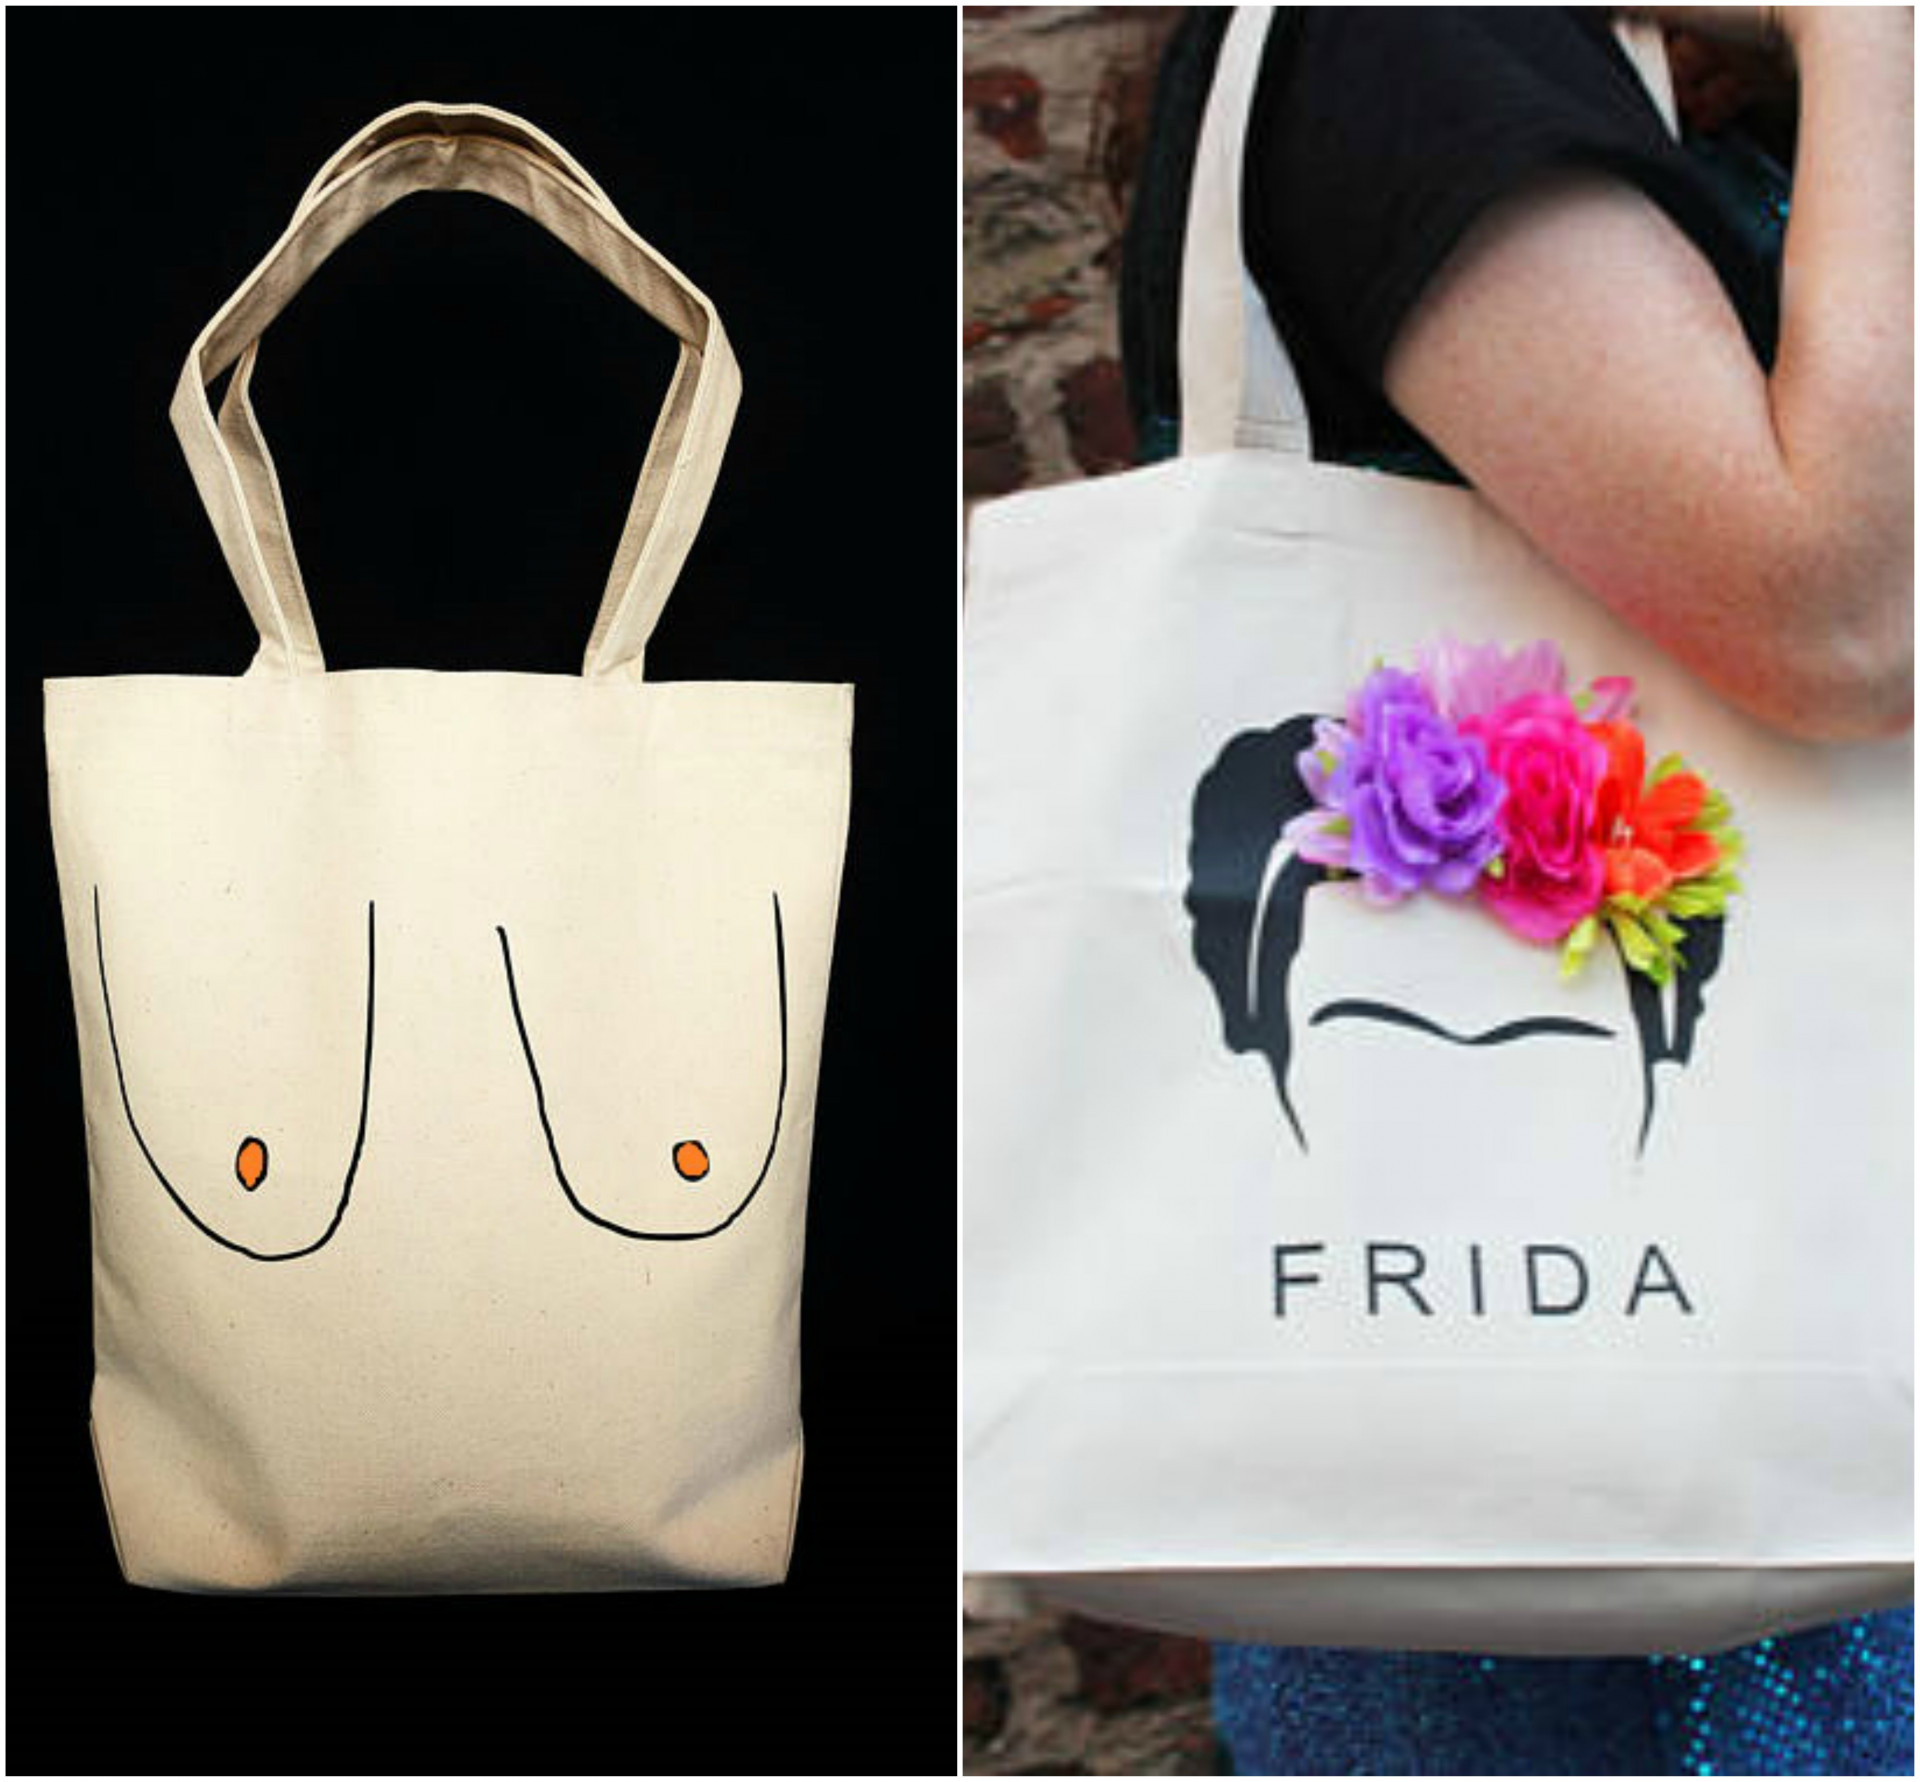 https://www.etsy.com/it/listing/555634349/frida-kahlo-tote-bag-frida-bag-3d-flower?ga_order=most_relevant&ga_search_type=all&ga_view_type=gallery&ga_search_query=frida%20kahlo%20bag&ref=sc_gallery_1&plkey=1bc69fa1985cbbd54a504a88105958e42e82fdd2:555634349